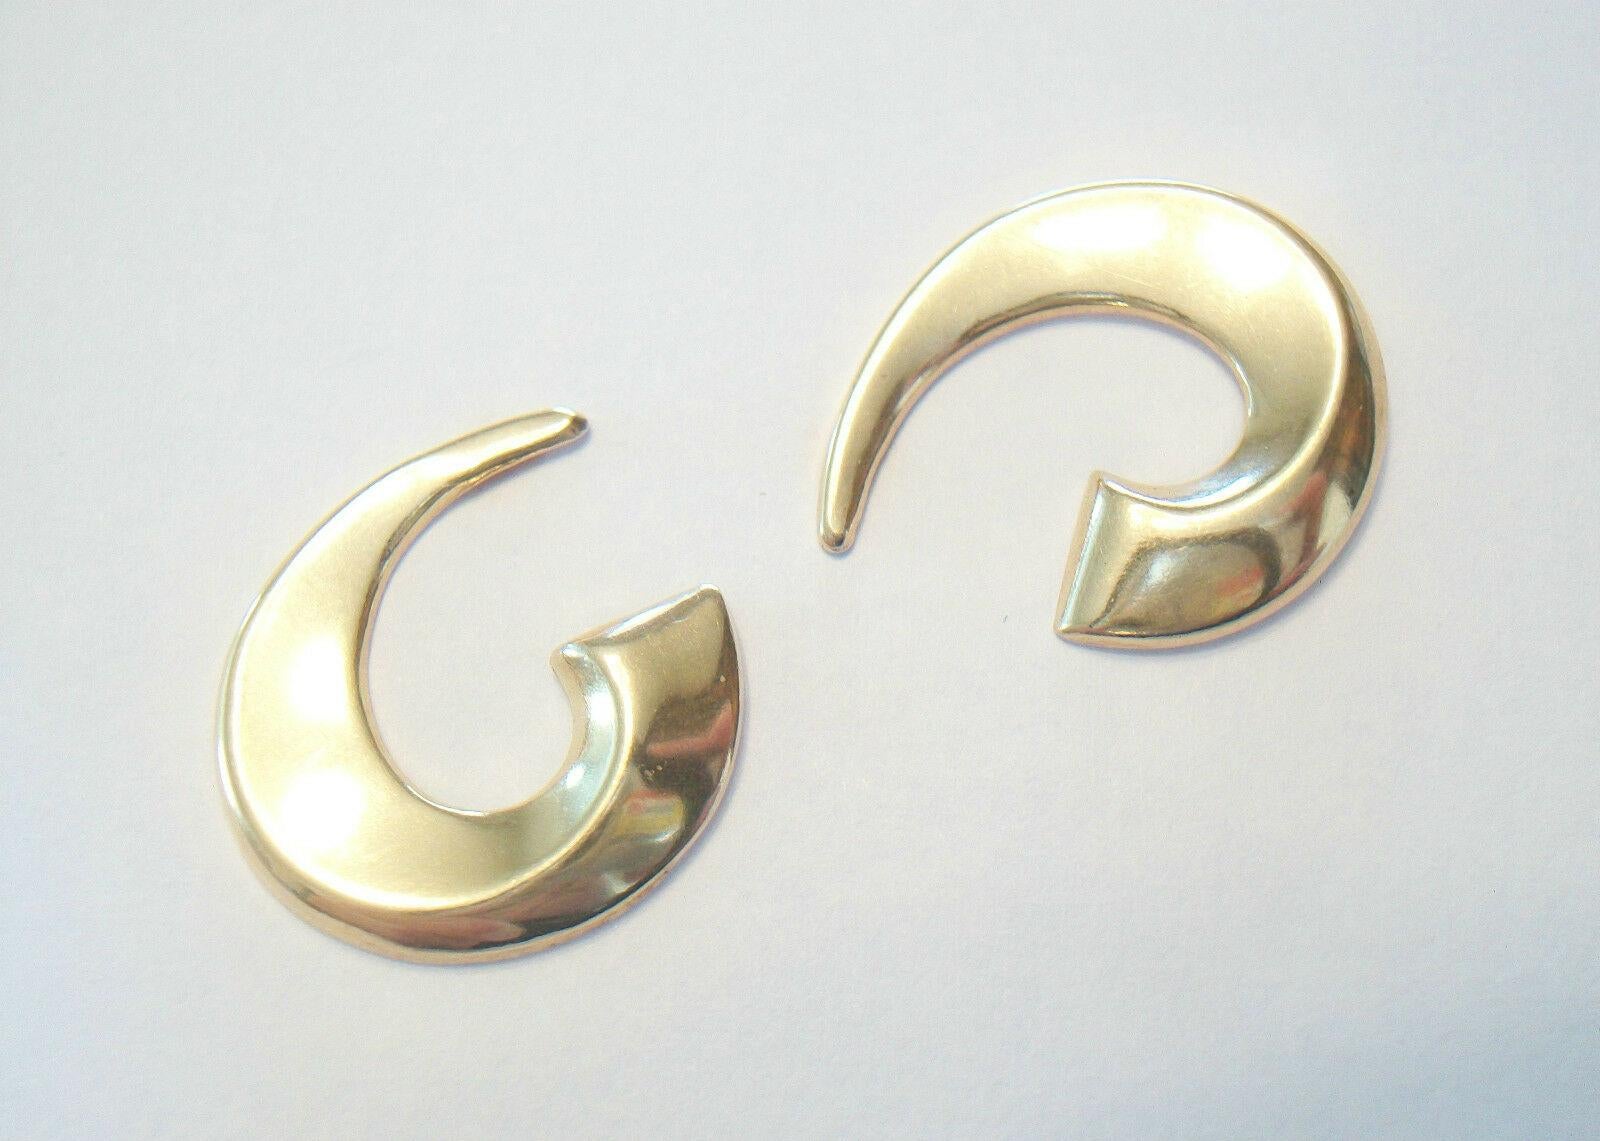 Modern Vintage 14k Yellow Gold 'C' Scroll Earrings, Signed, U.S, Late 20th Century For Sale